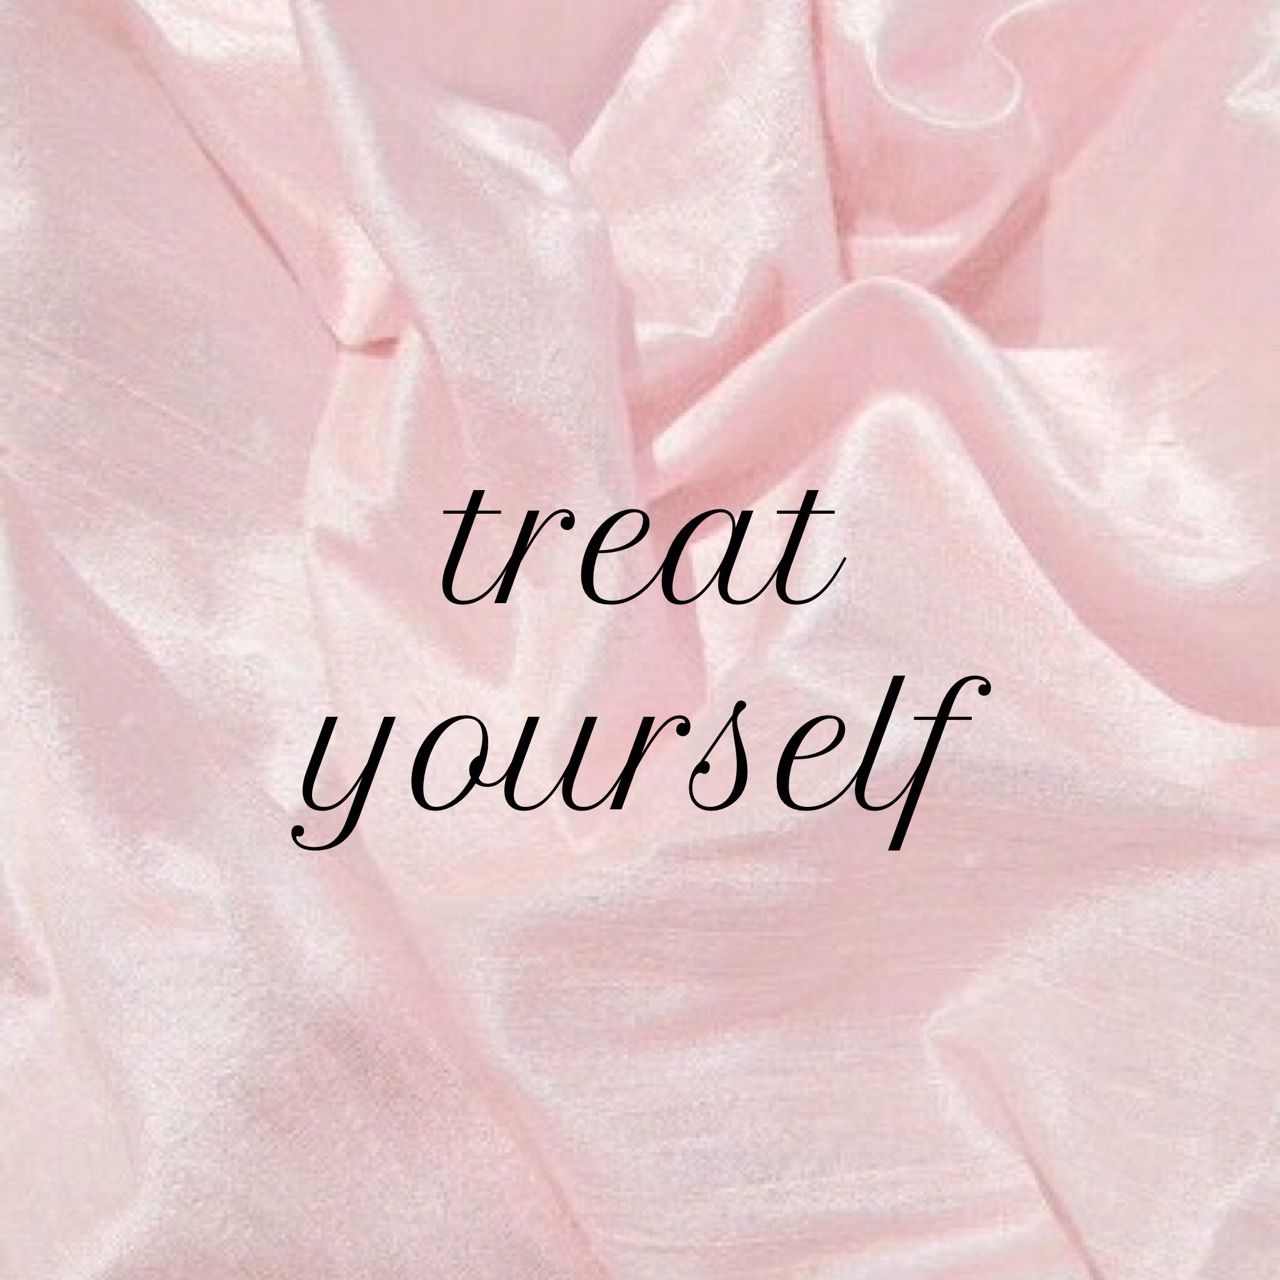 Aesthetic Pink Quotes Wallpapers